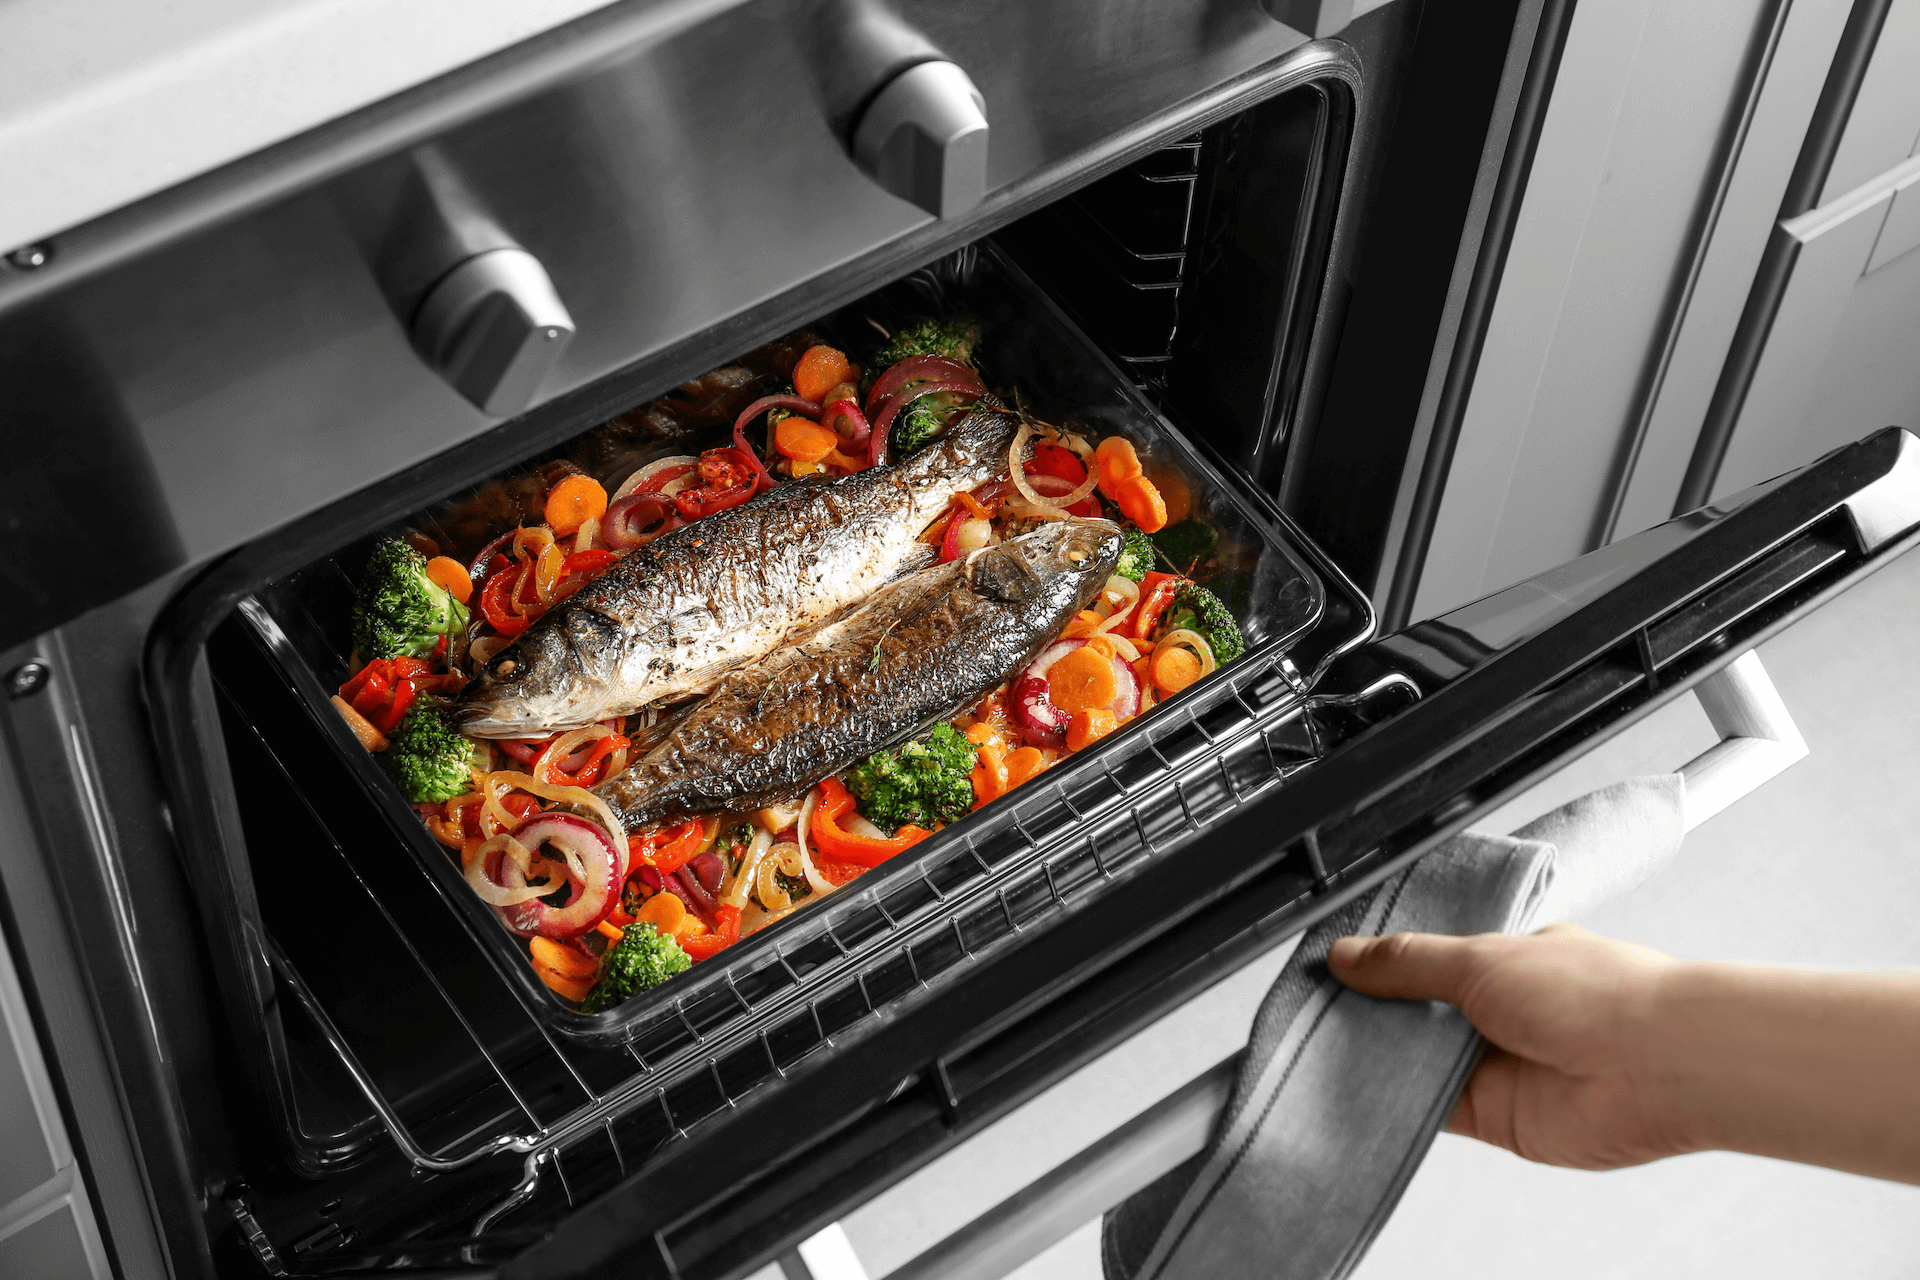 Cooking fish in an oven